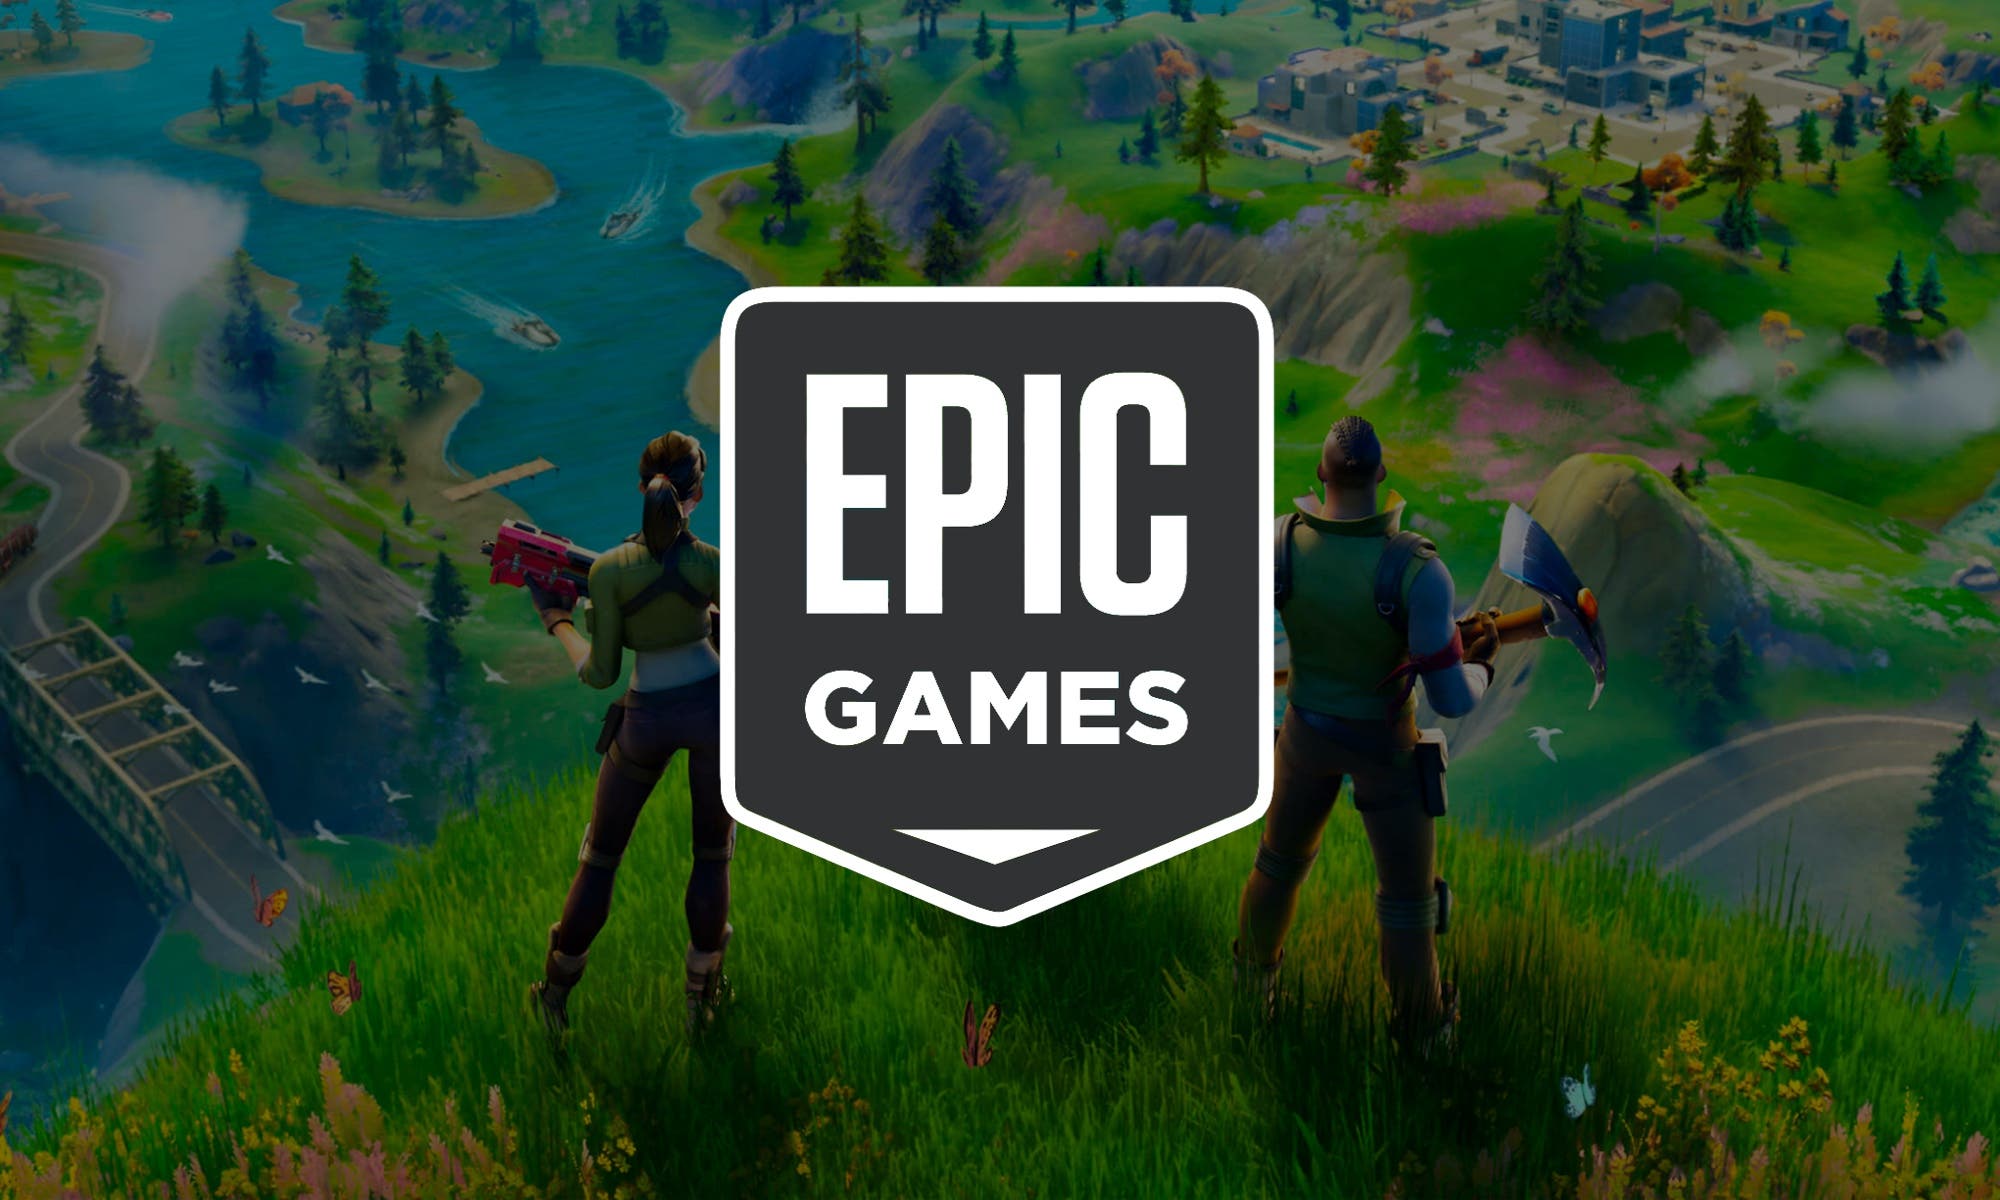 Epic detail plans for Epic Games Store improvements - and how they